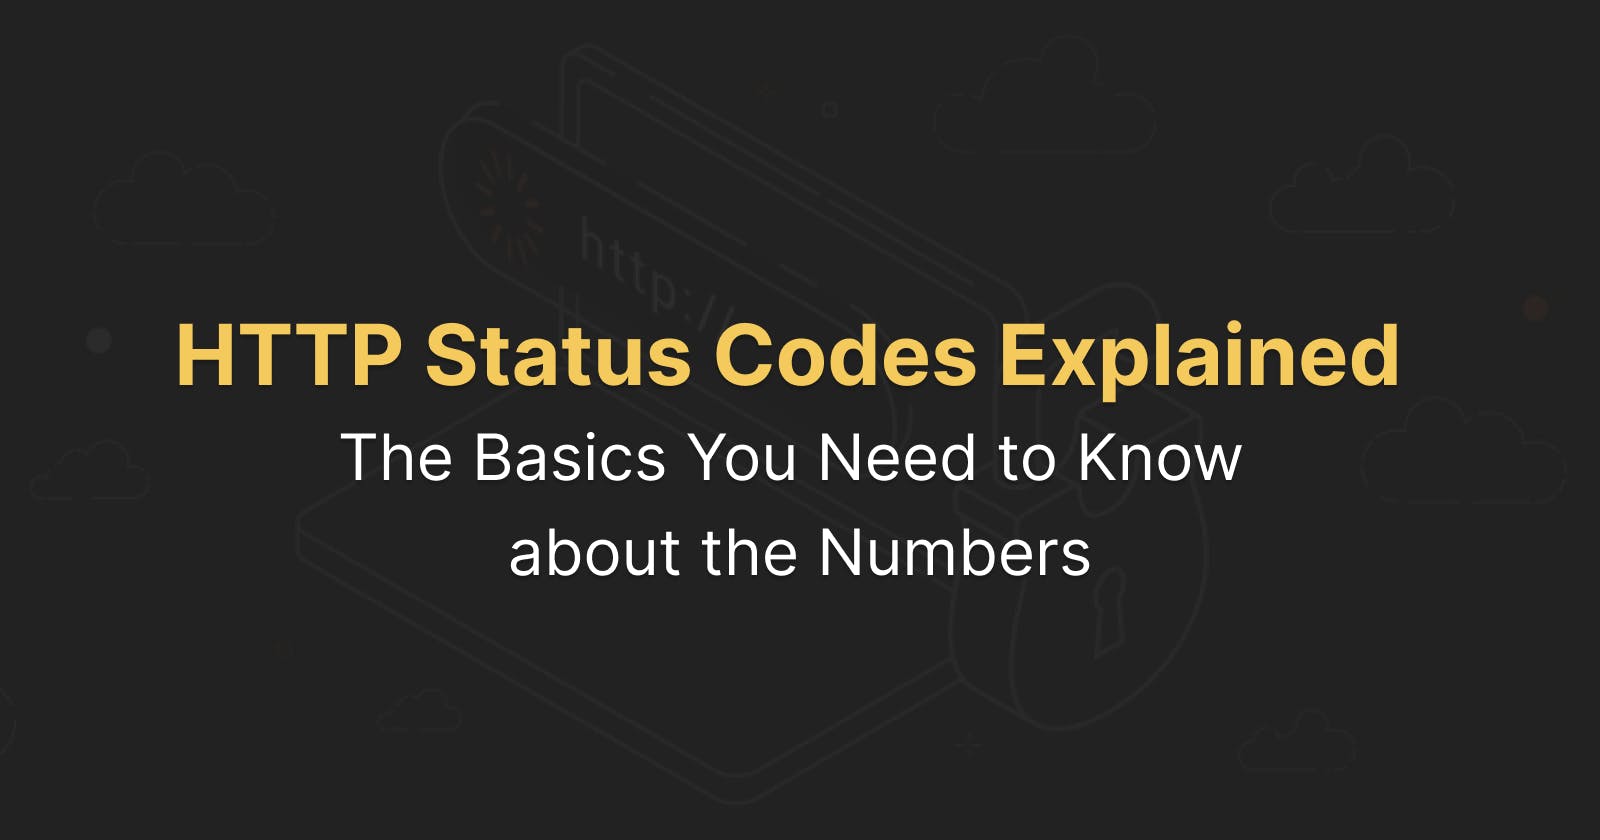 HTTP Status Codes Explained: The Basics You Need to Know about the Numbers